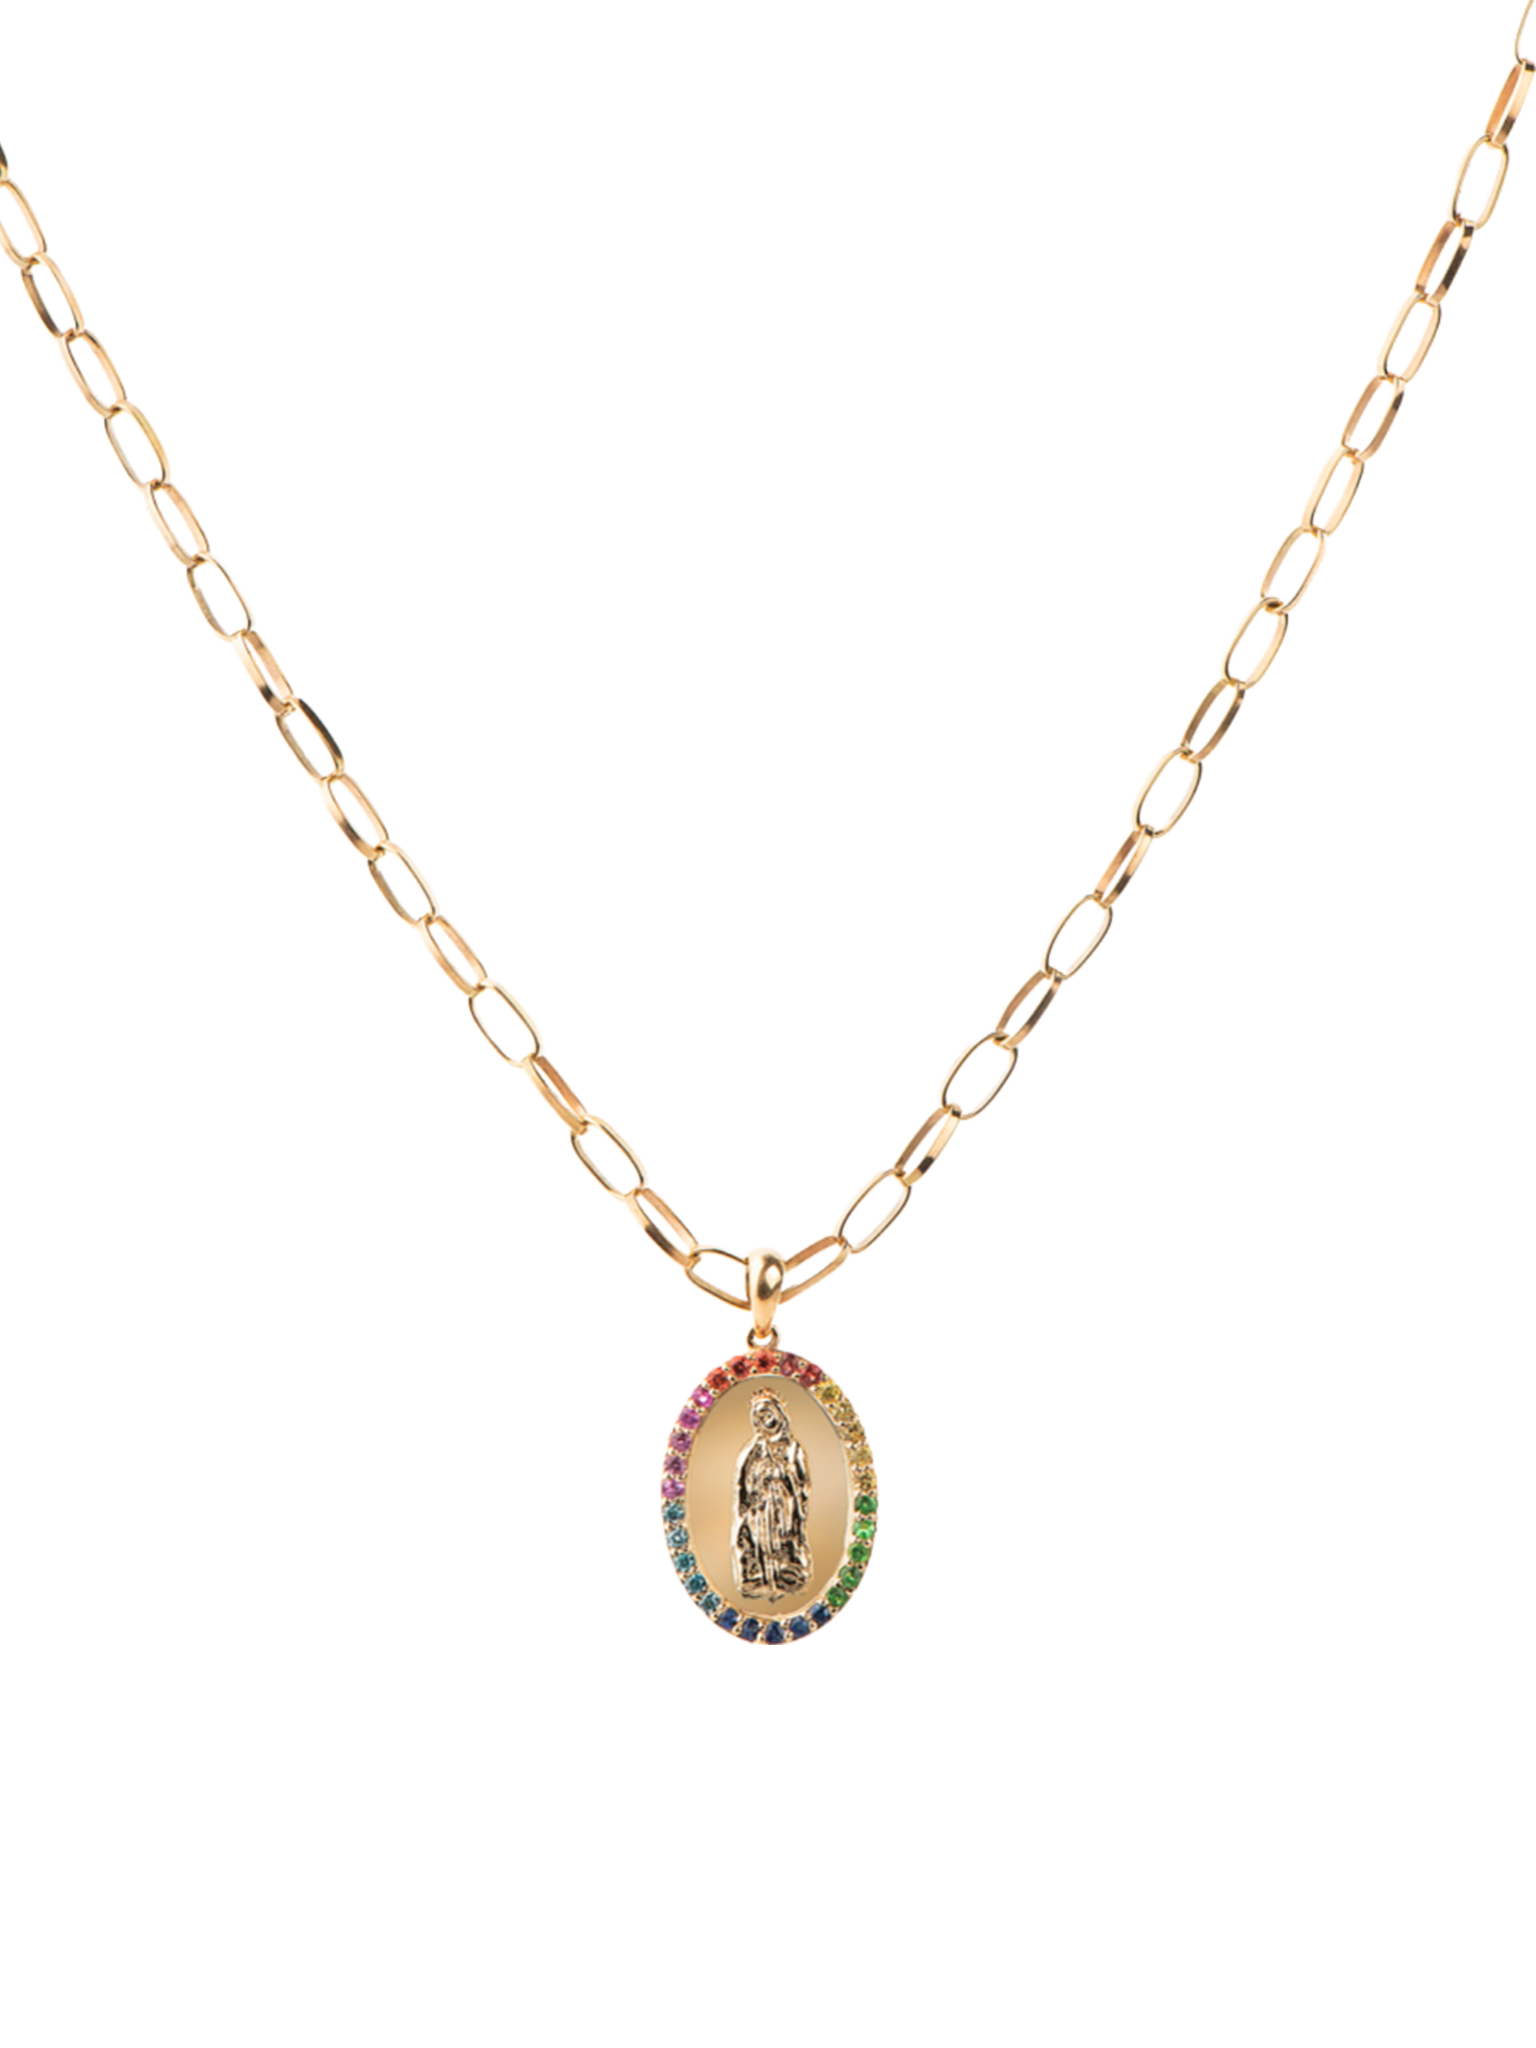 Virgin mary colourful pendant necklace